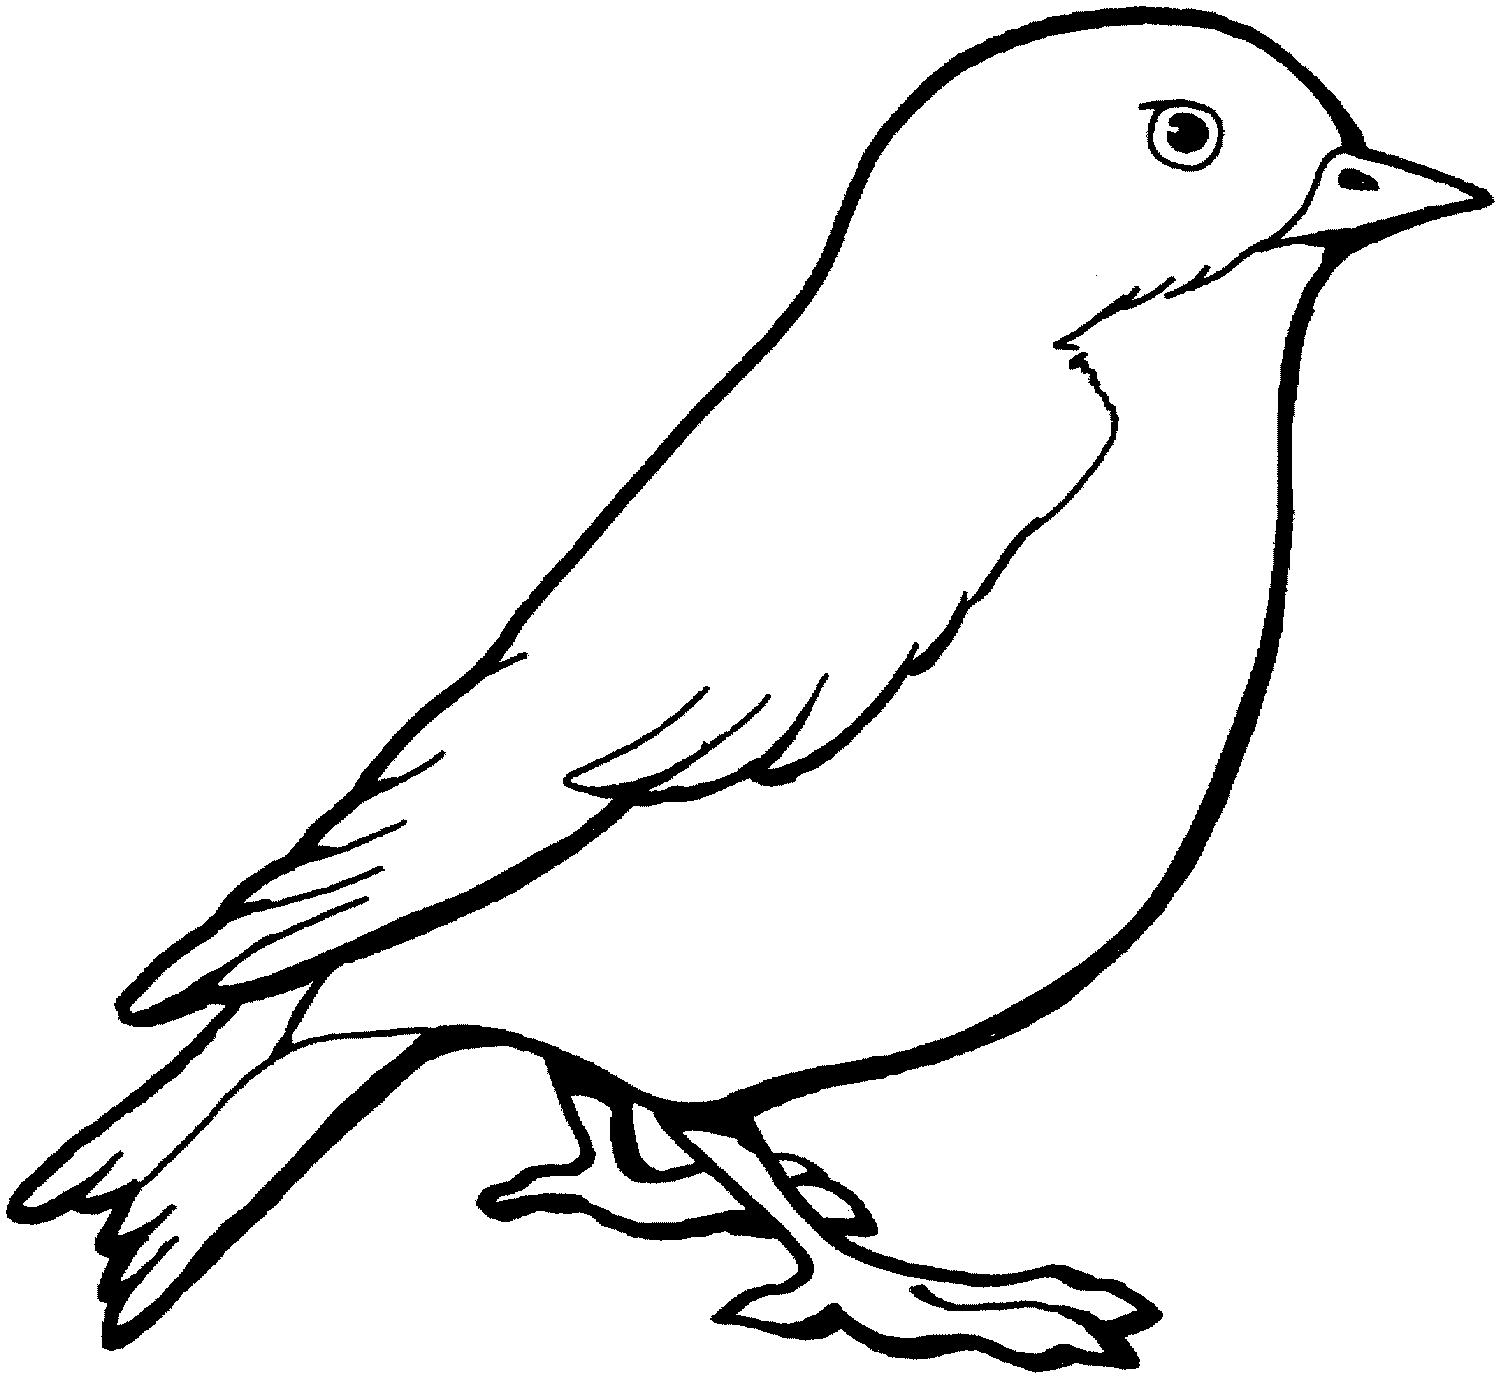 bird coloring pages to print bird coloring pages to download and print for free bird coloring pages print to 